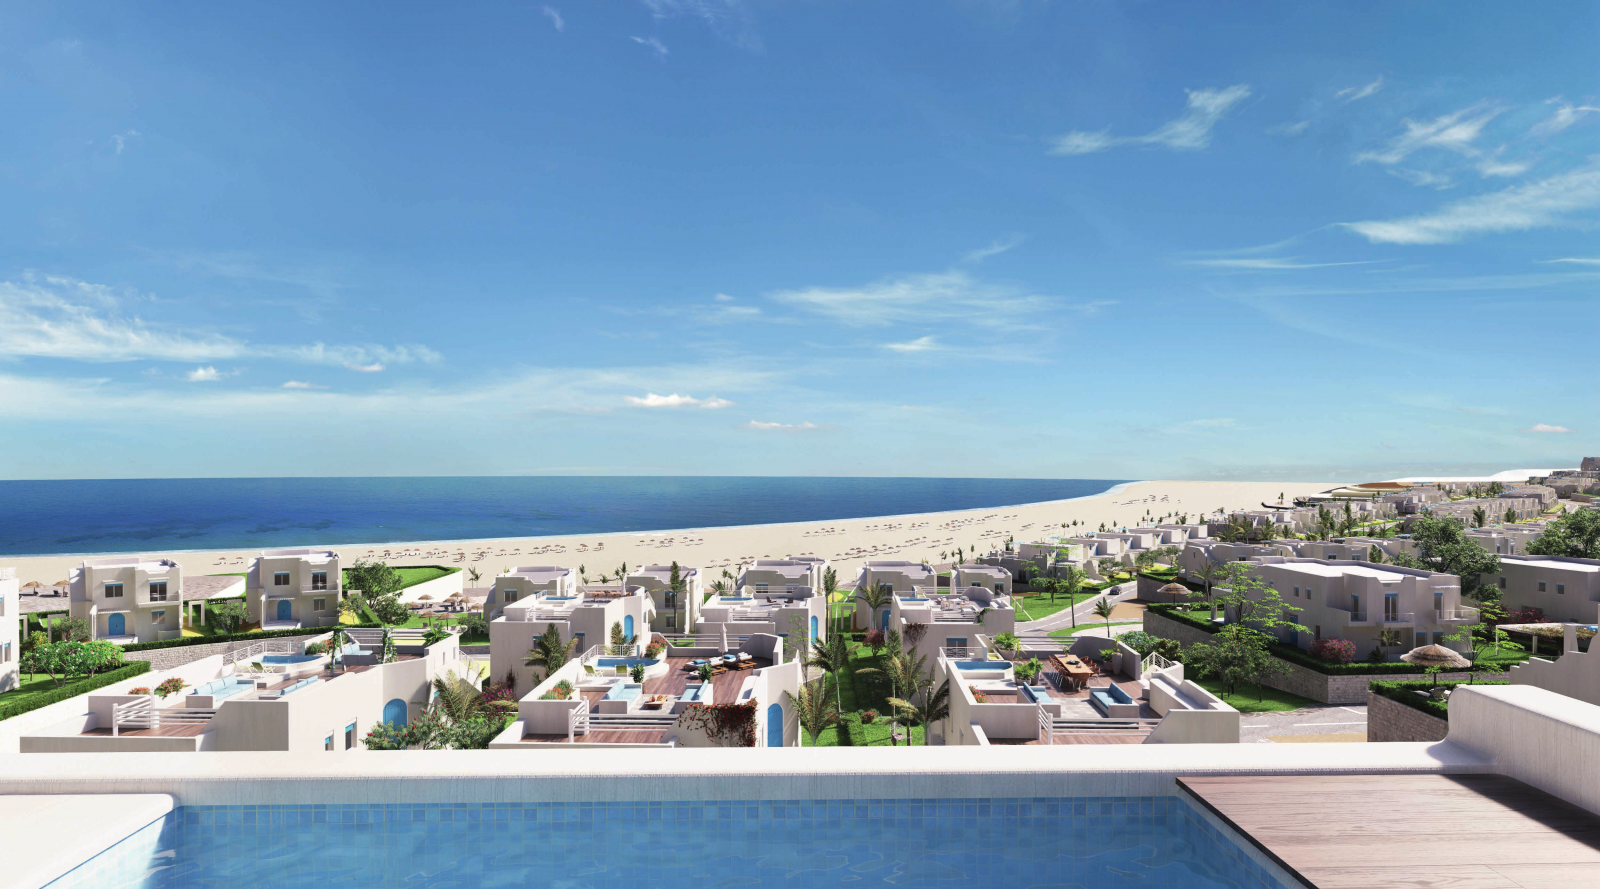 Hurry up to book in Hacienda North Coast units starting from 360 meters